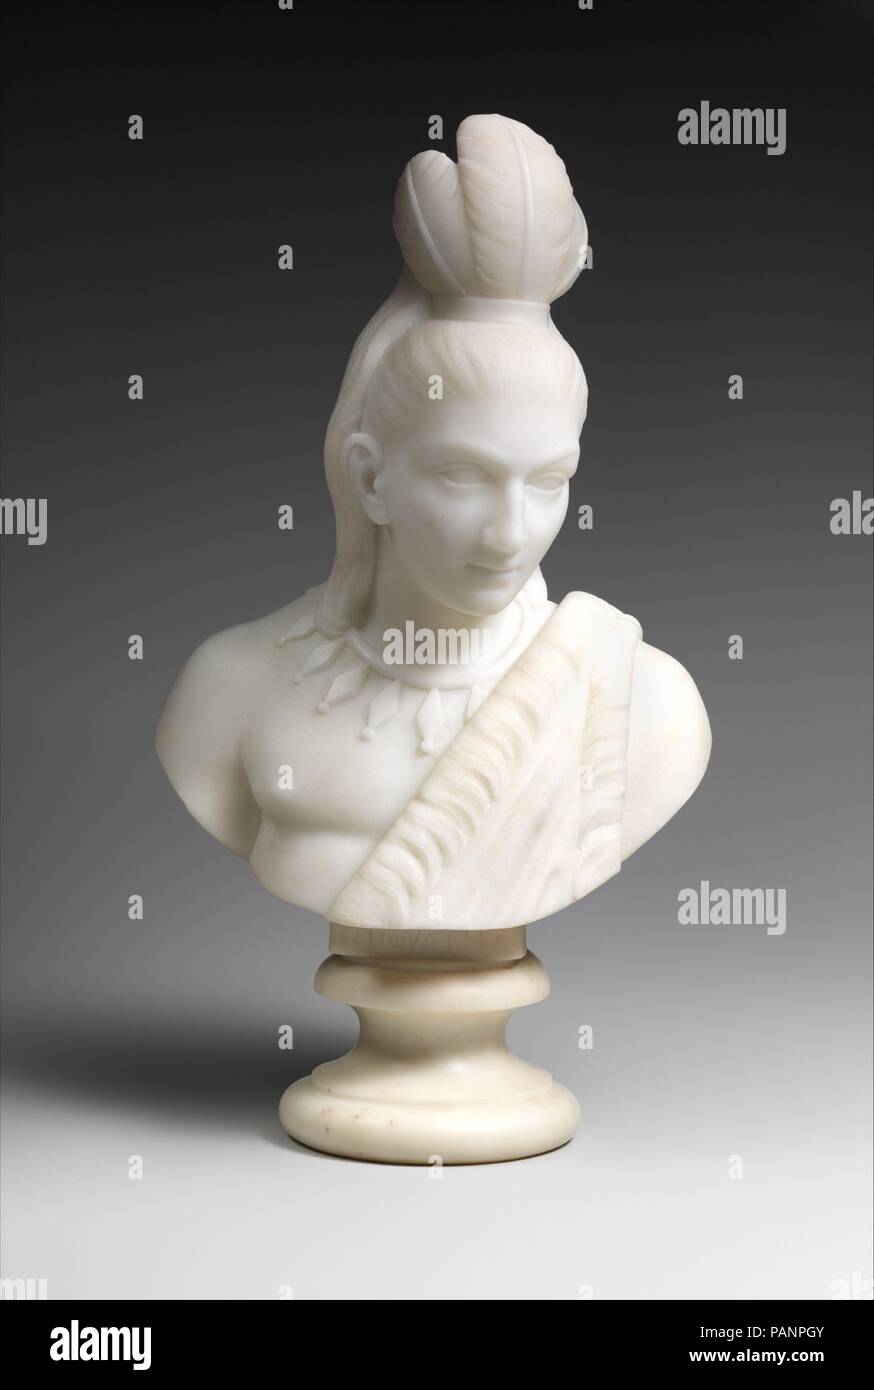 Hiawatha. Artist: Edmonia Lewis (American, 1844-1907). Dimensions: 13 3/4 × 7 3/4 × 5 1/2 in. (34.9 × 19.7 × 14 cm). Date: 1868.  Like many American sculptors of the nineteenth century, Lewis, an artist of African-American and Chippewa (Ojibwa) ancestry, worked in Rome. Her multiracial identity and her gender were formative in her selection of subjects. In addition to pieces addressing abolition and emancipation, between 1866 and 1872 she completed a series of marble sculptures on the popular theme of Hiawatha and Minnehaha, drawn from Henry Wadsworth Longfellow's epic poem 'The Song of Hiawat Stock Photo